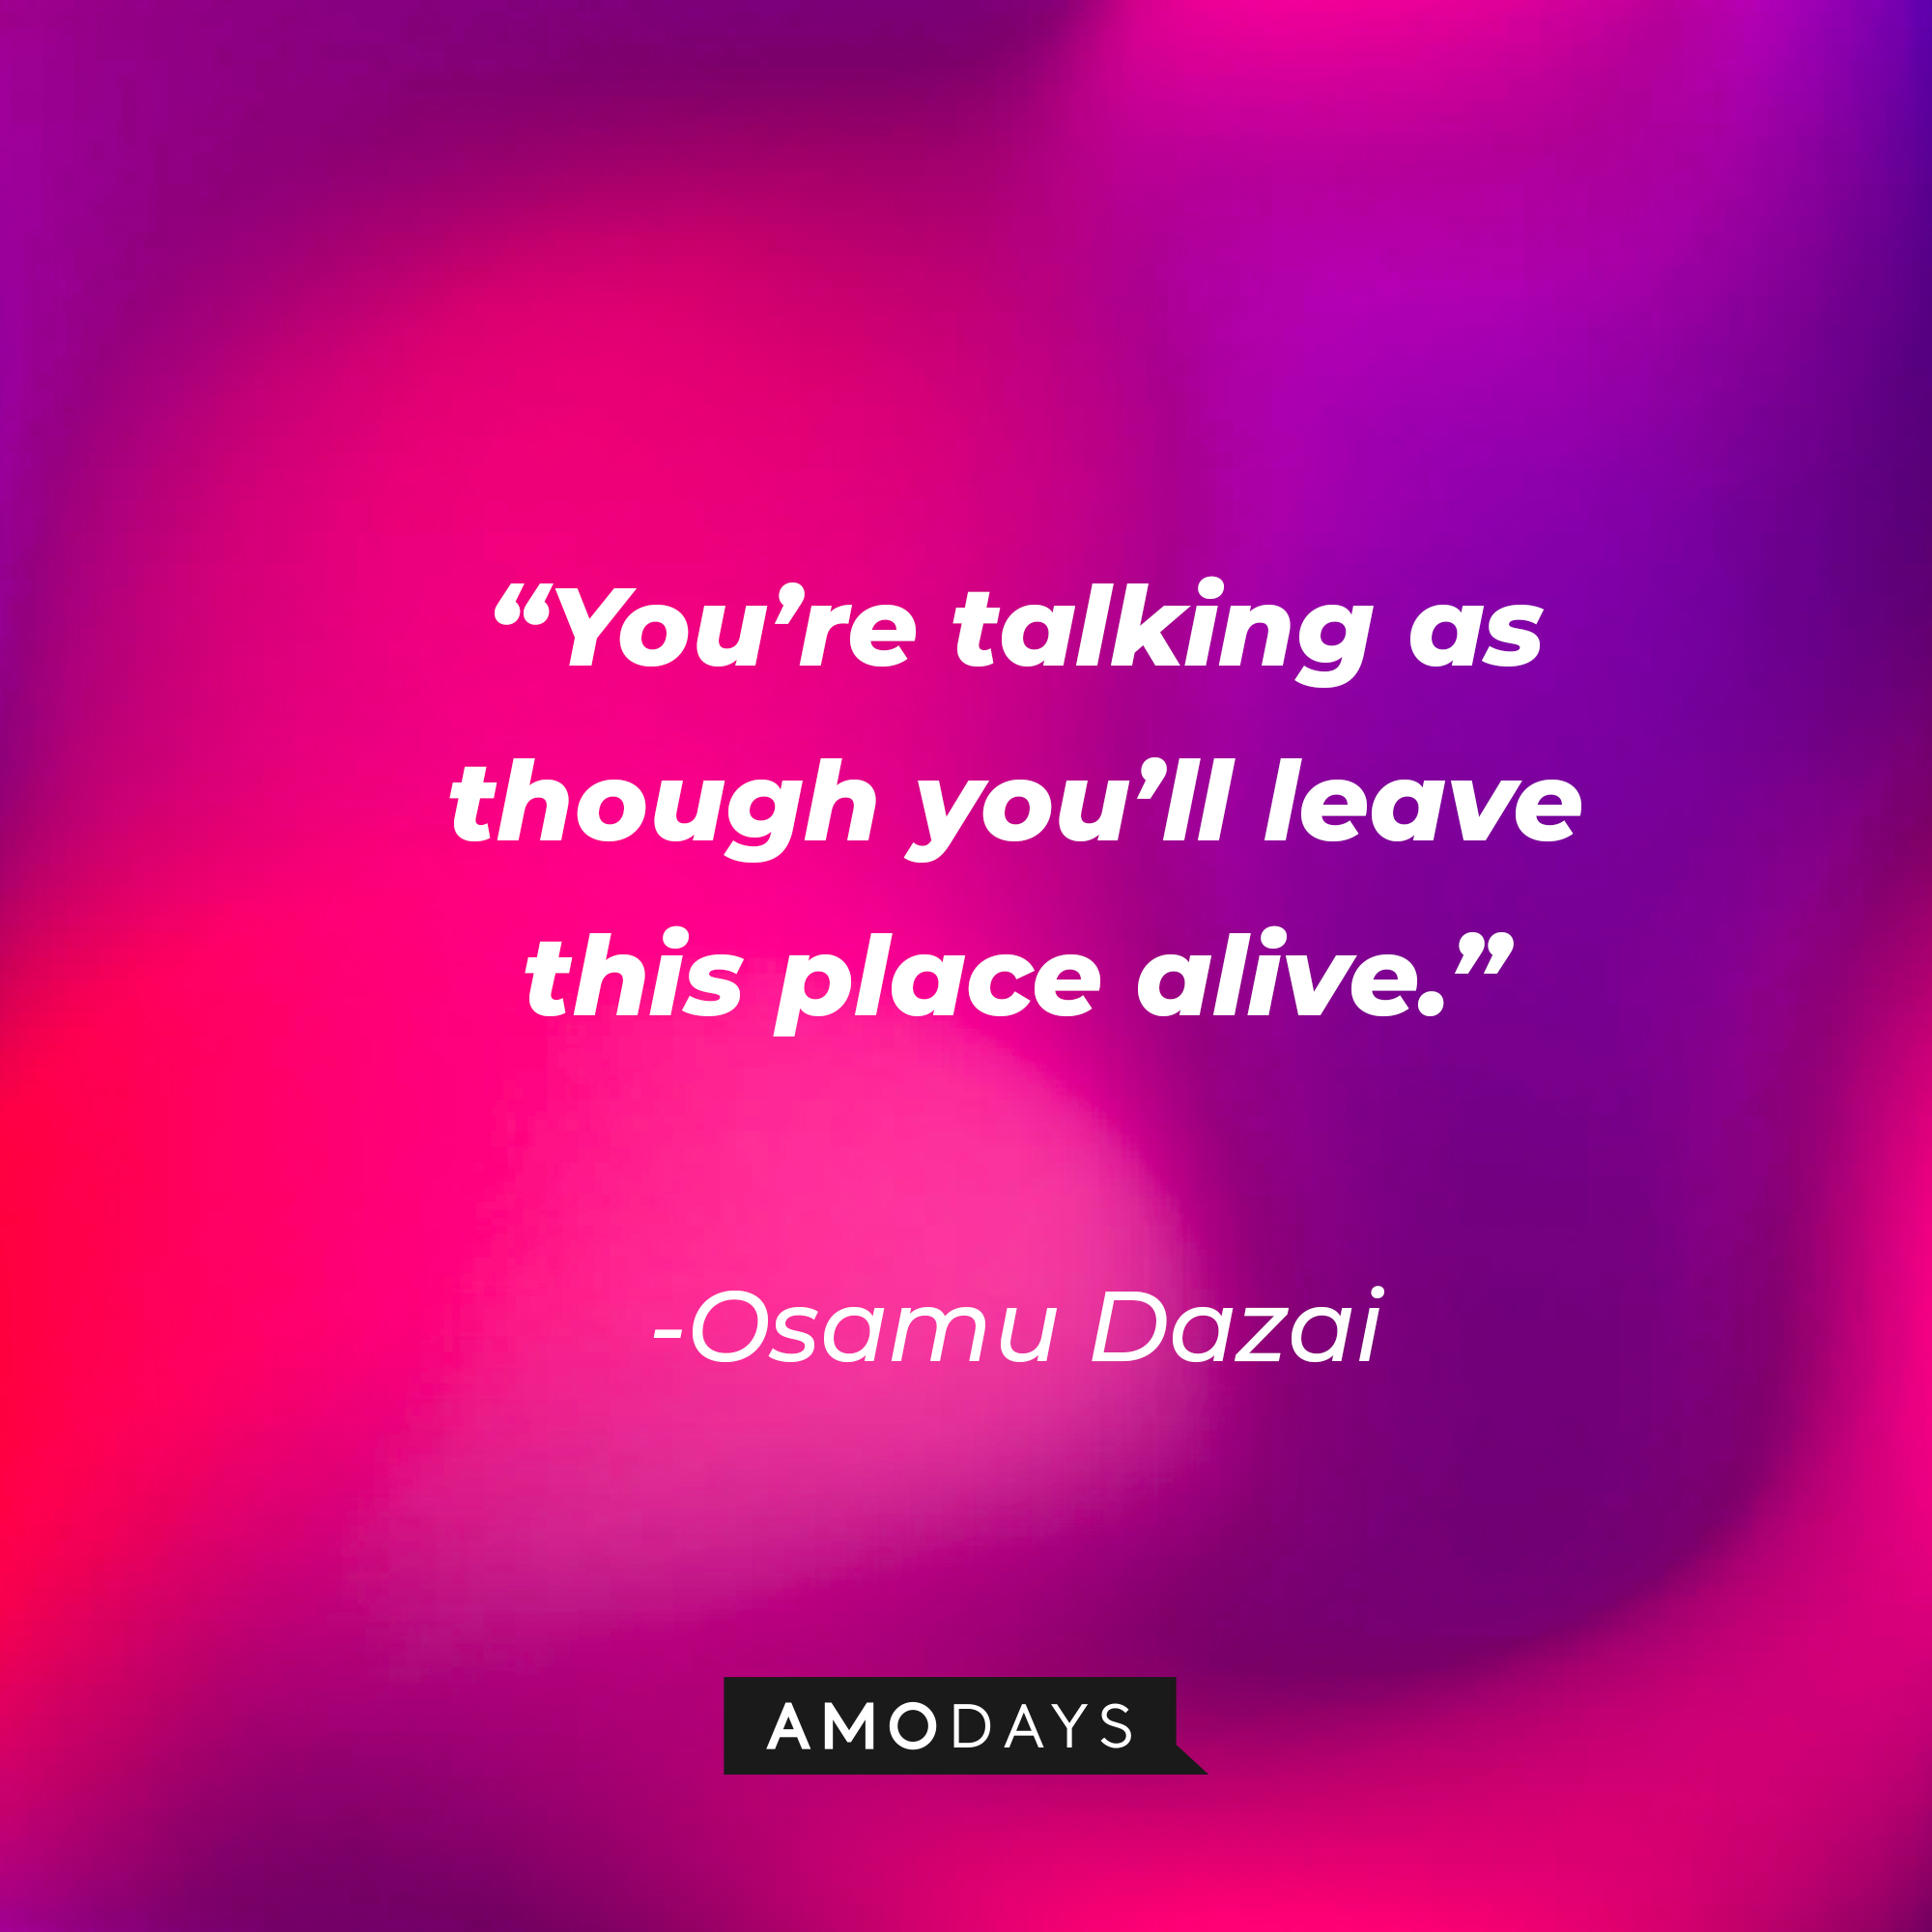 Osamu Dazai’s quote: “You’re talking as though you’ll leave this place alive.” | Source: AmoDays